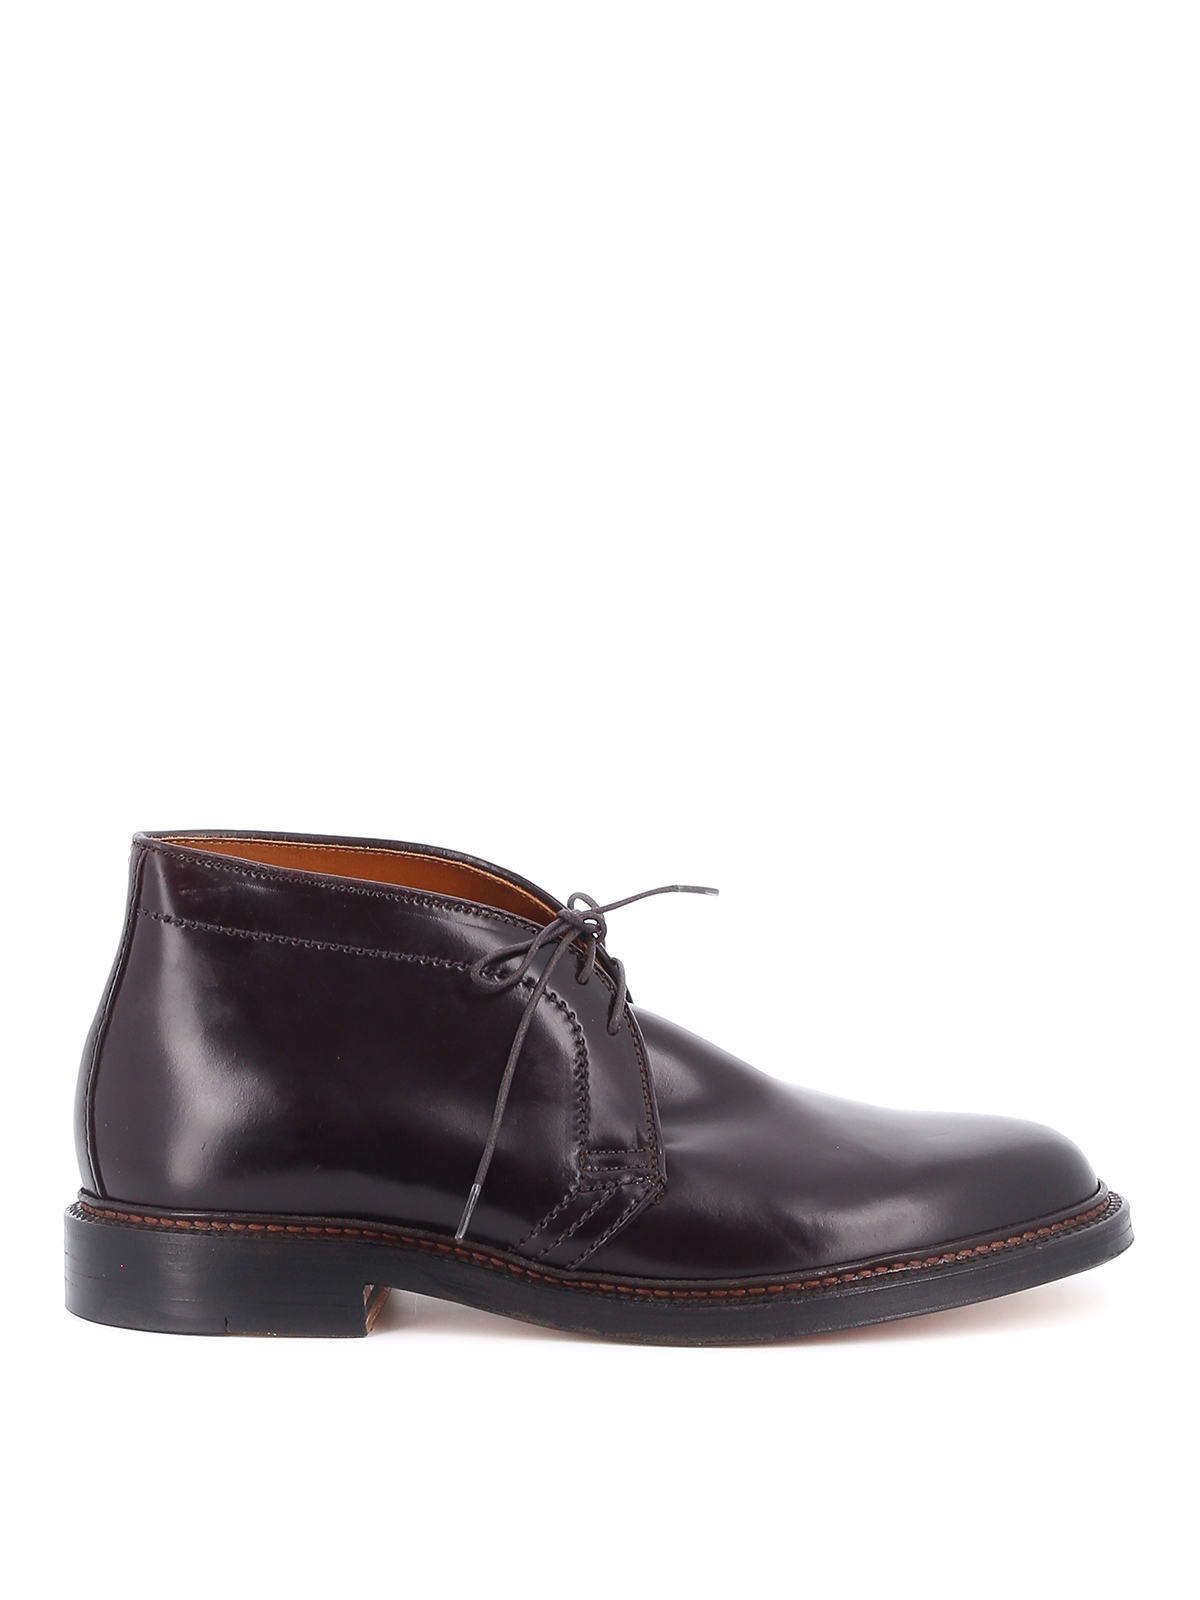 Alden - Leather desert boots - ankle boots - 1339